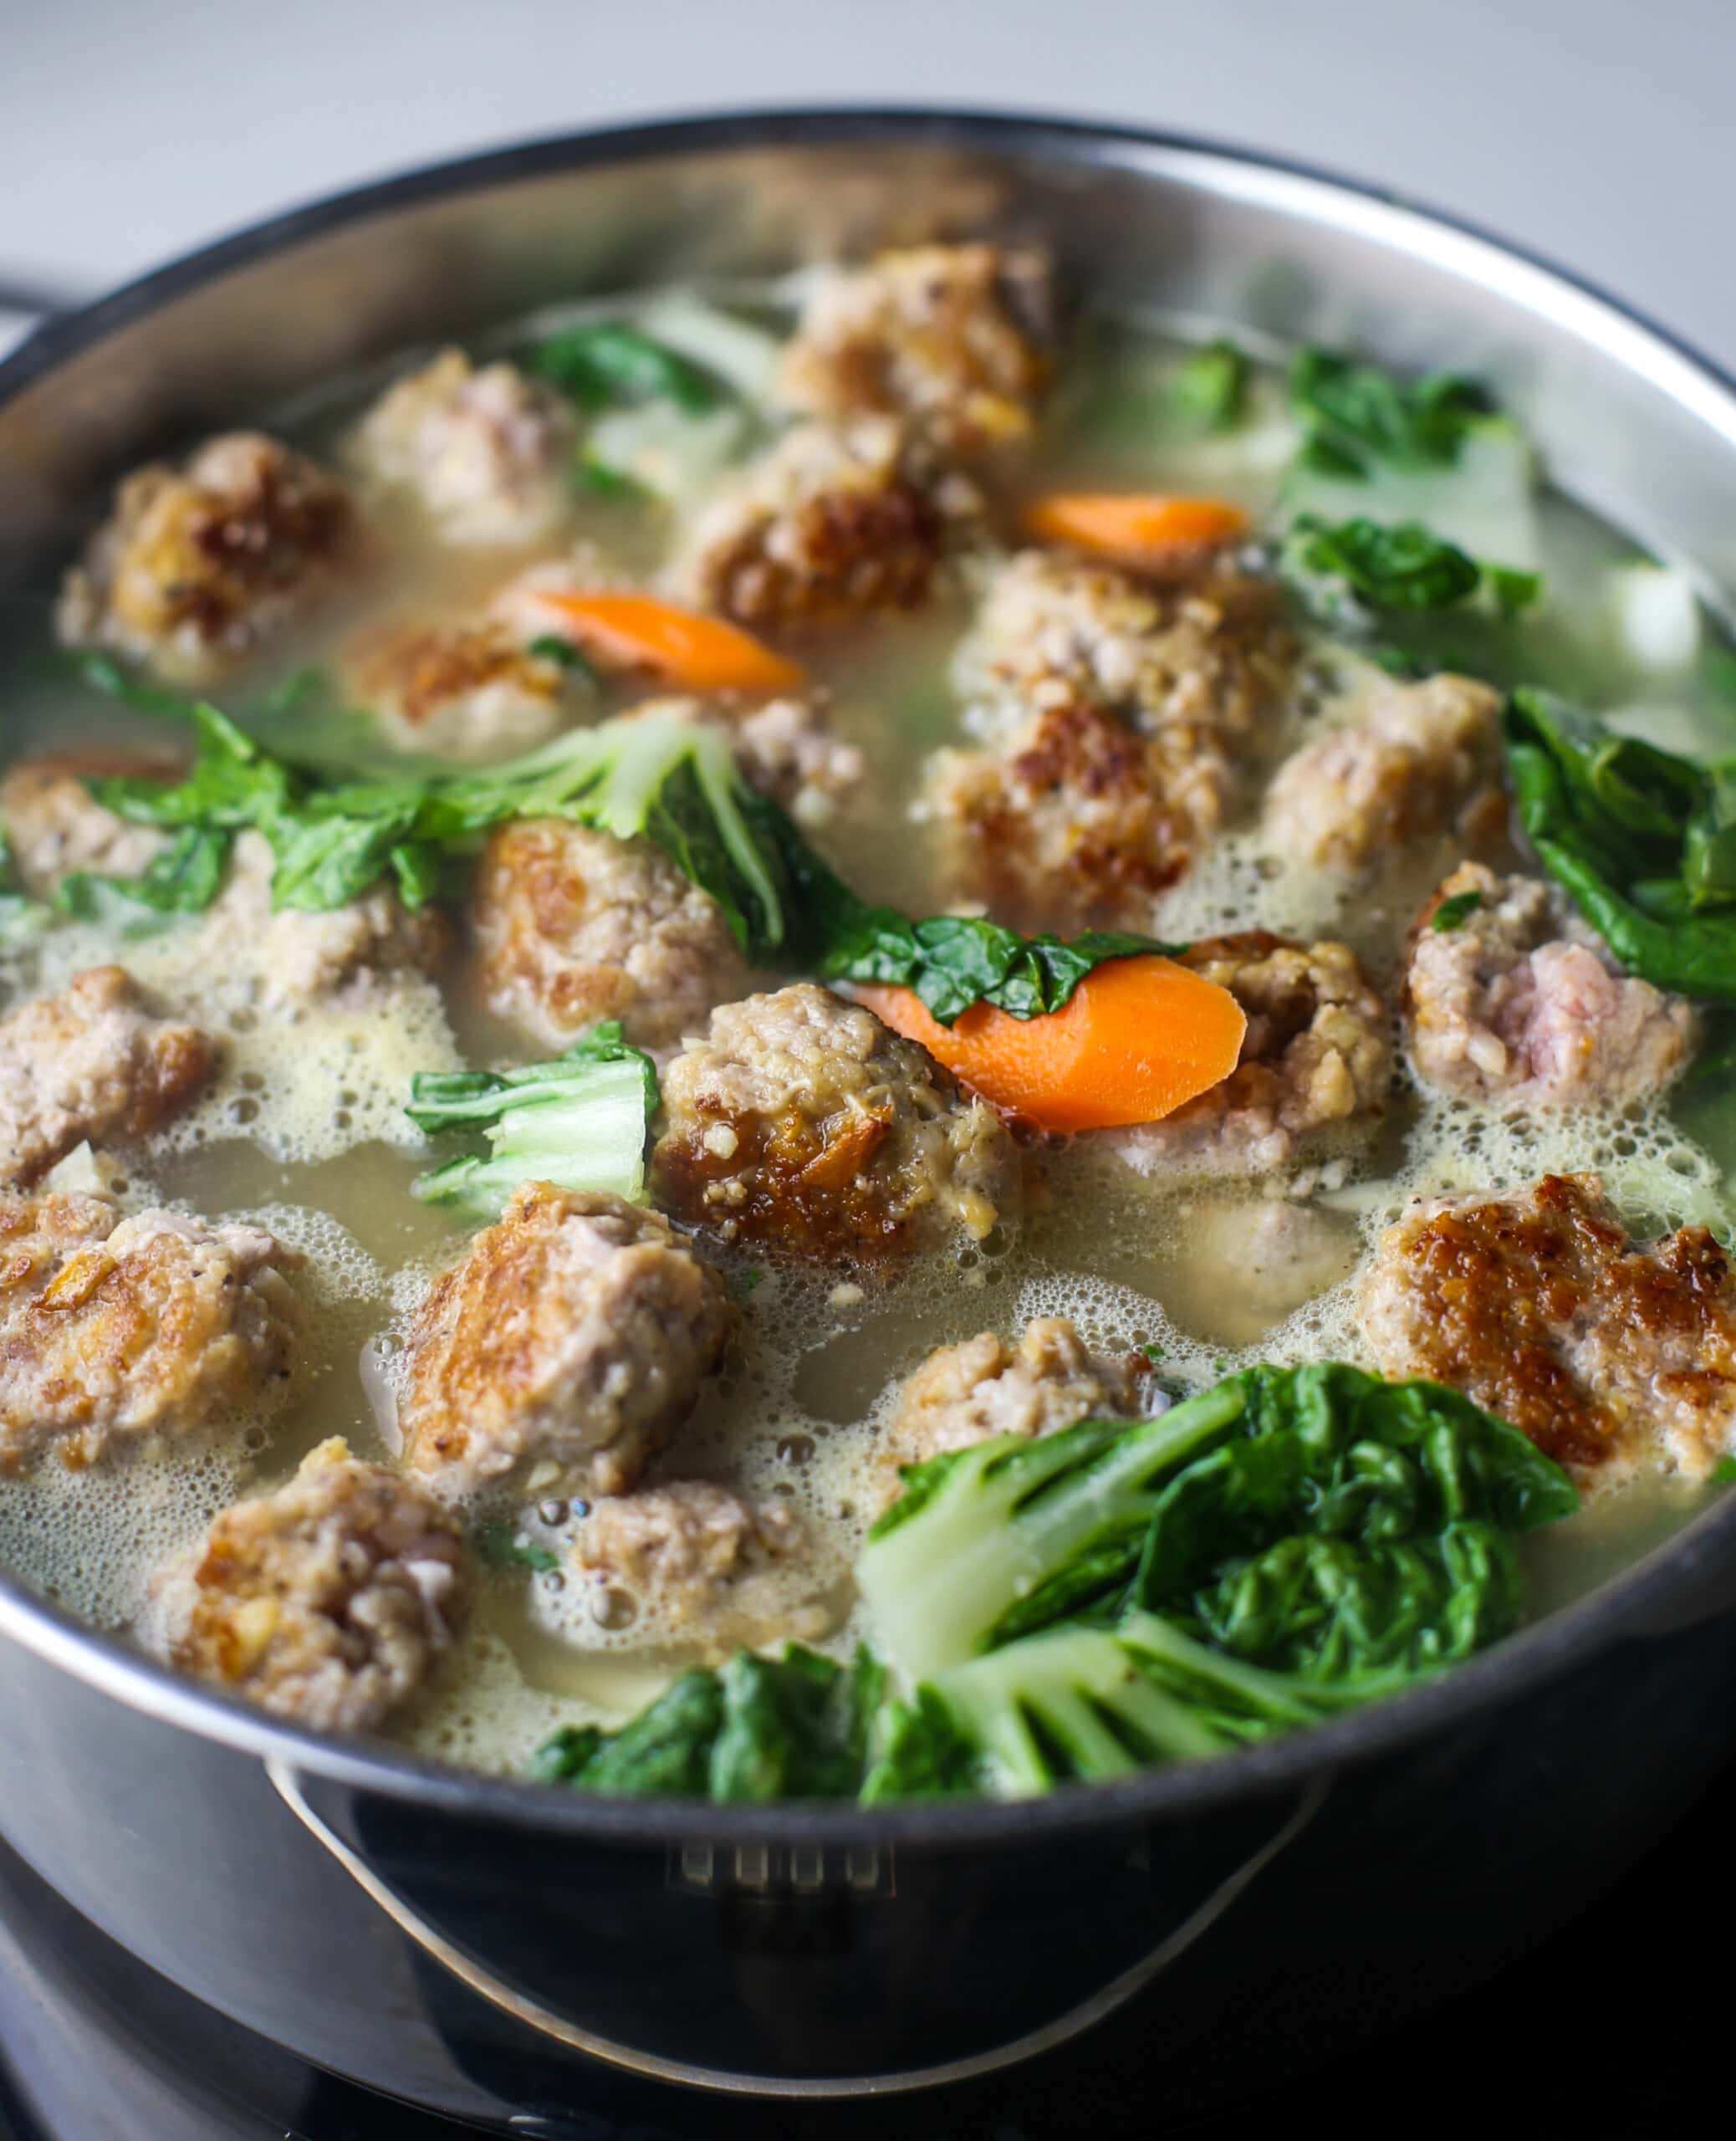 Ginger pork meatball soup with bok choy and carrots in a large stainless steel pot.